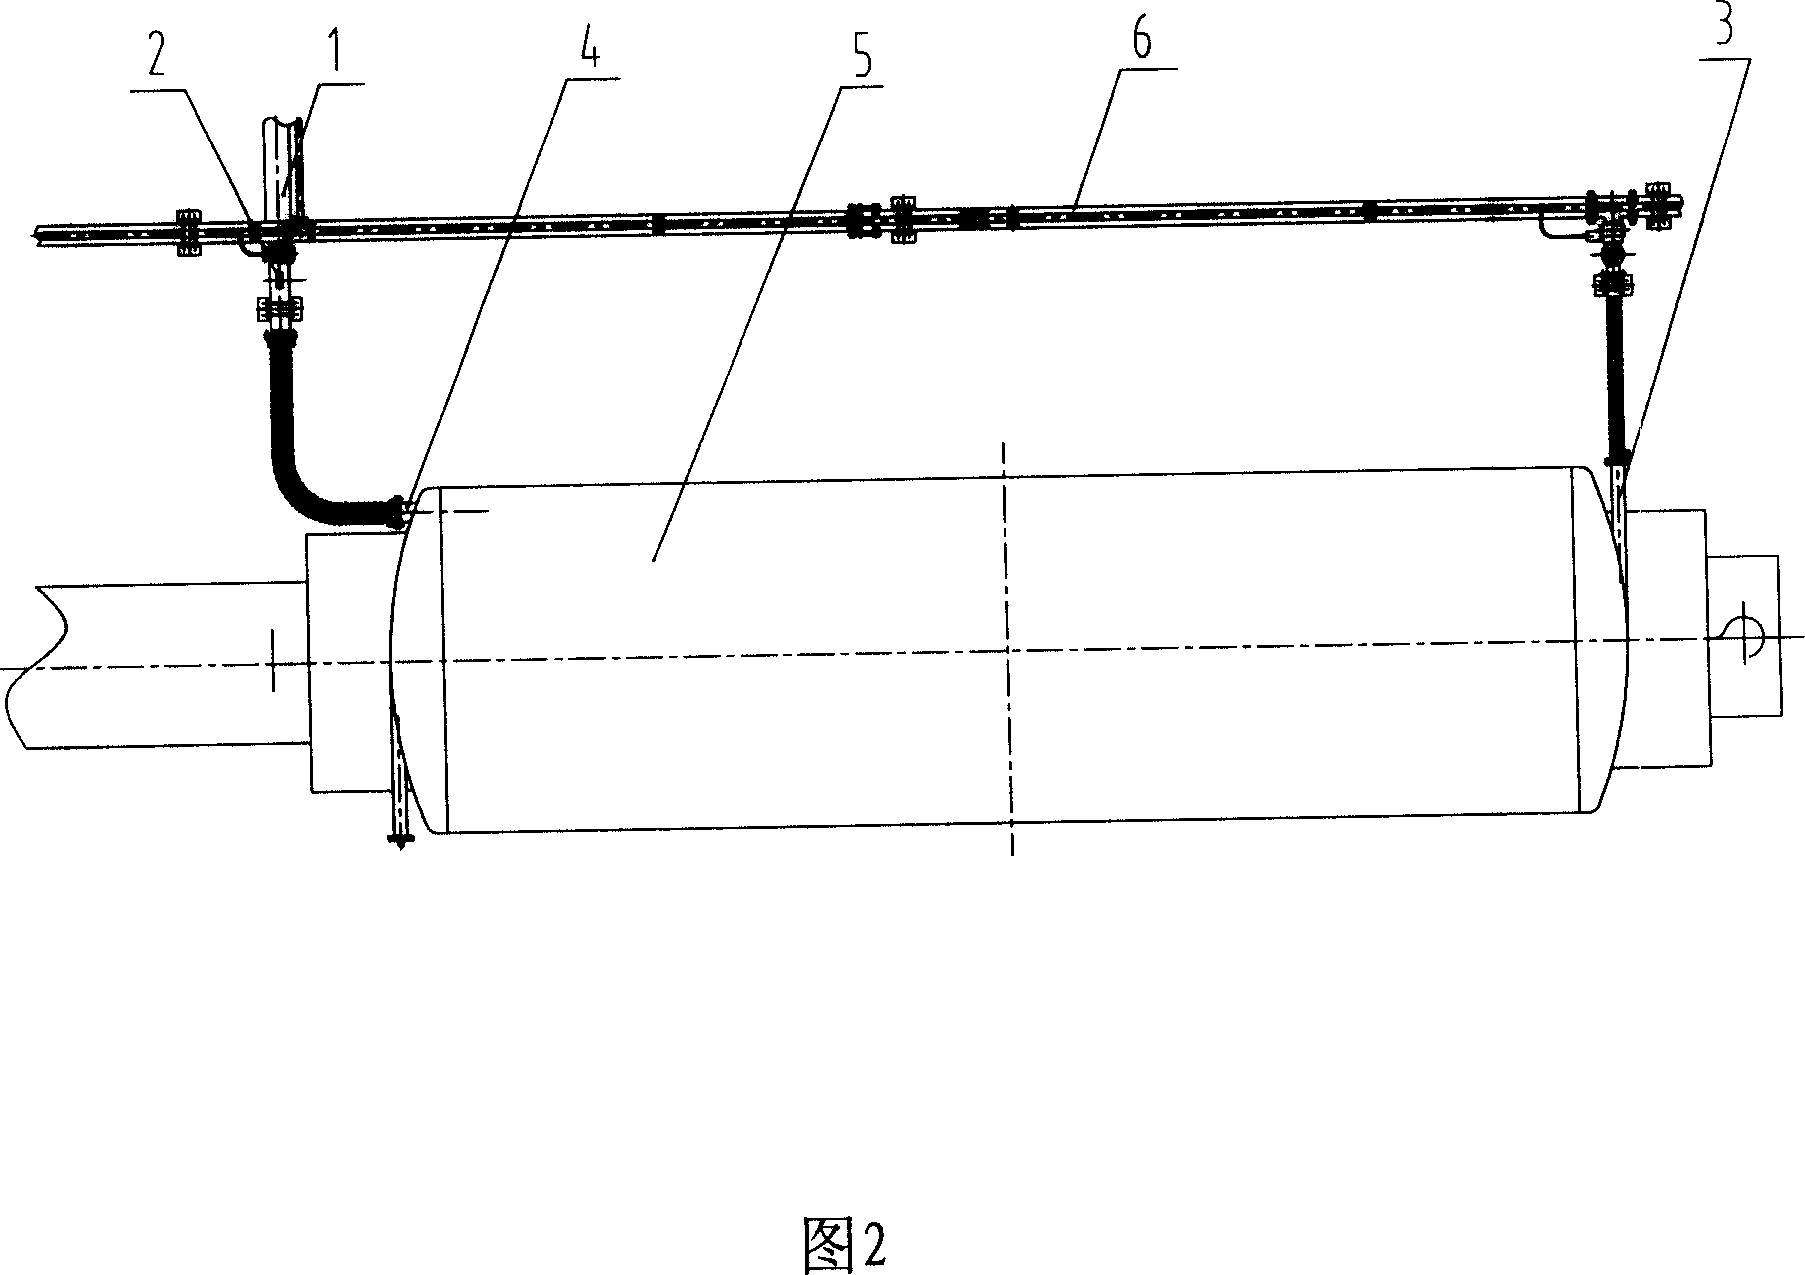 Automatic detecting device for unloading of bulk cement train